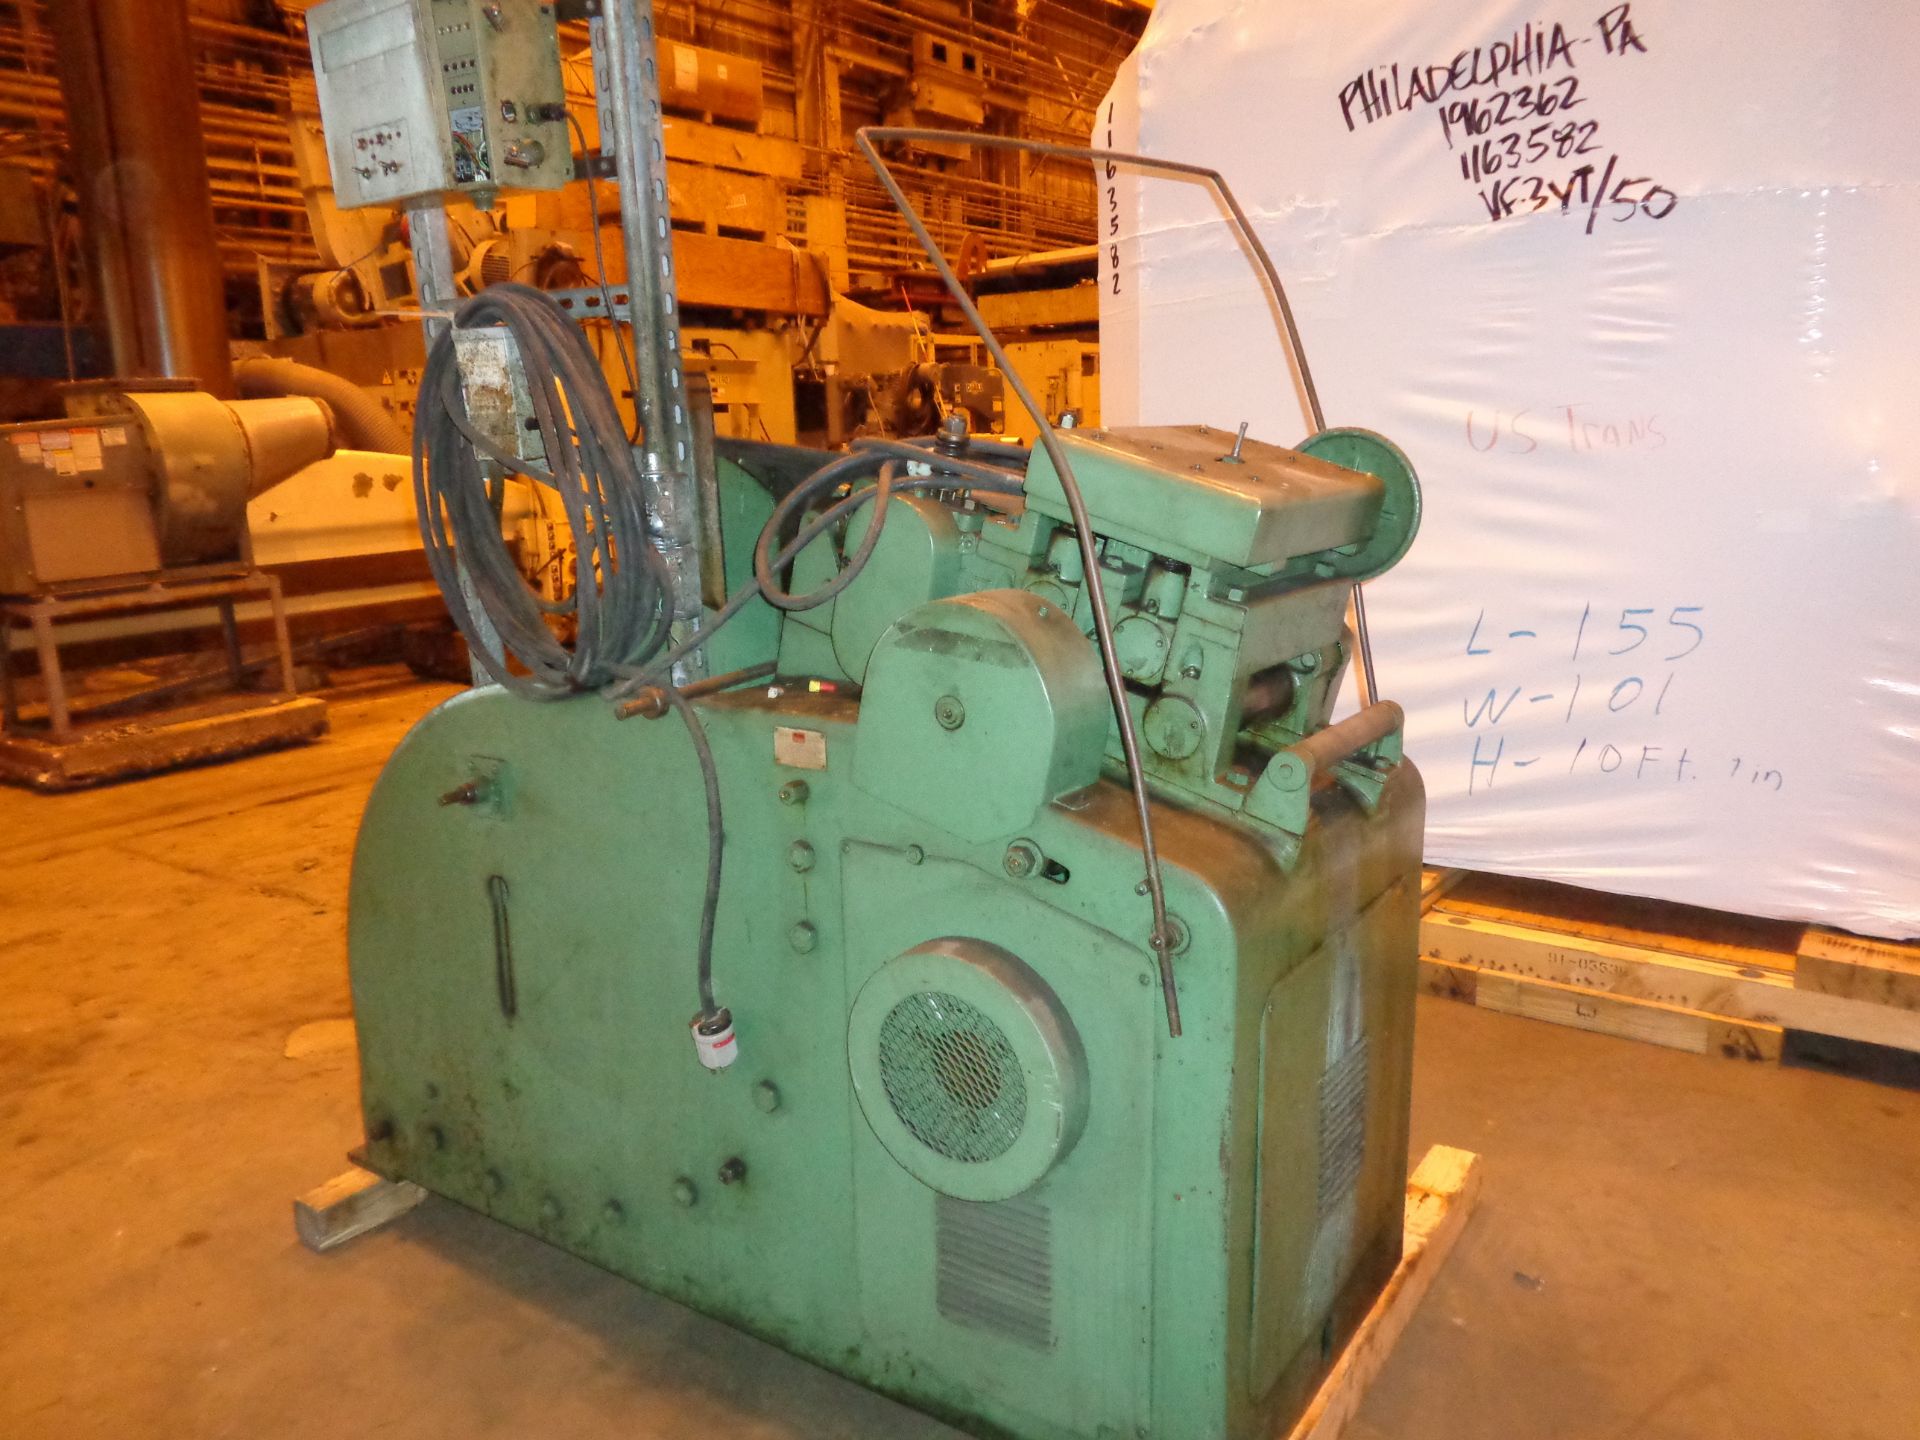 Littell Continuous Steel Coil Straightening Machine - Image 4 of 7